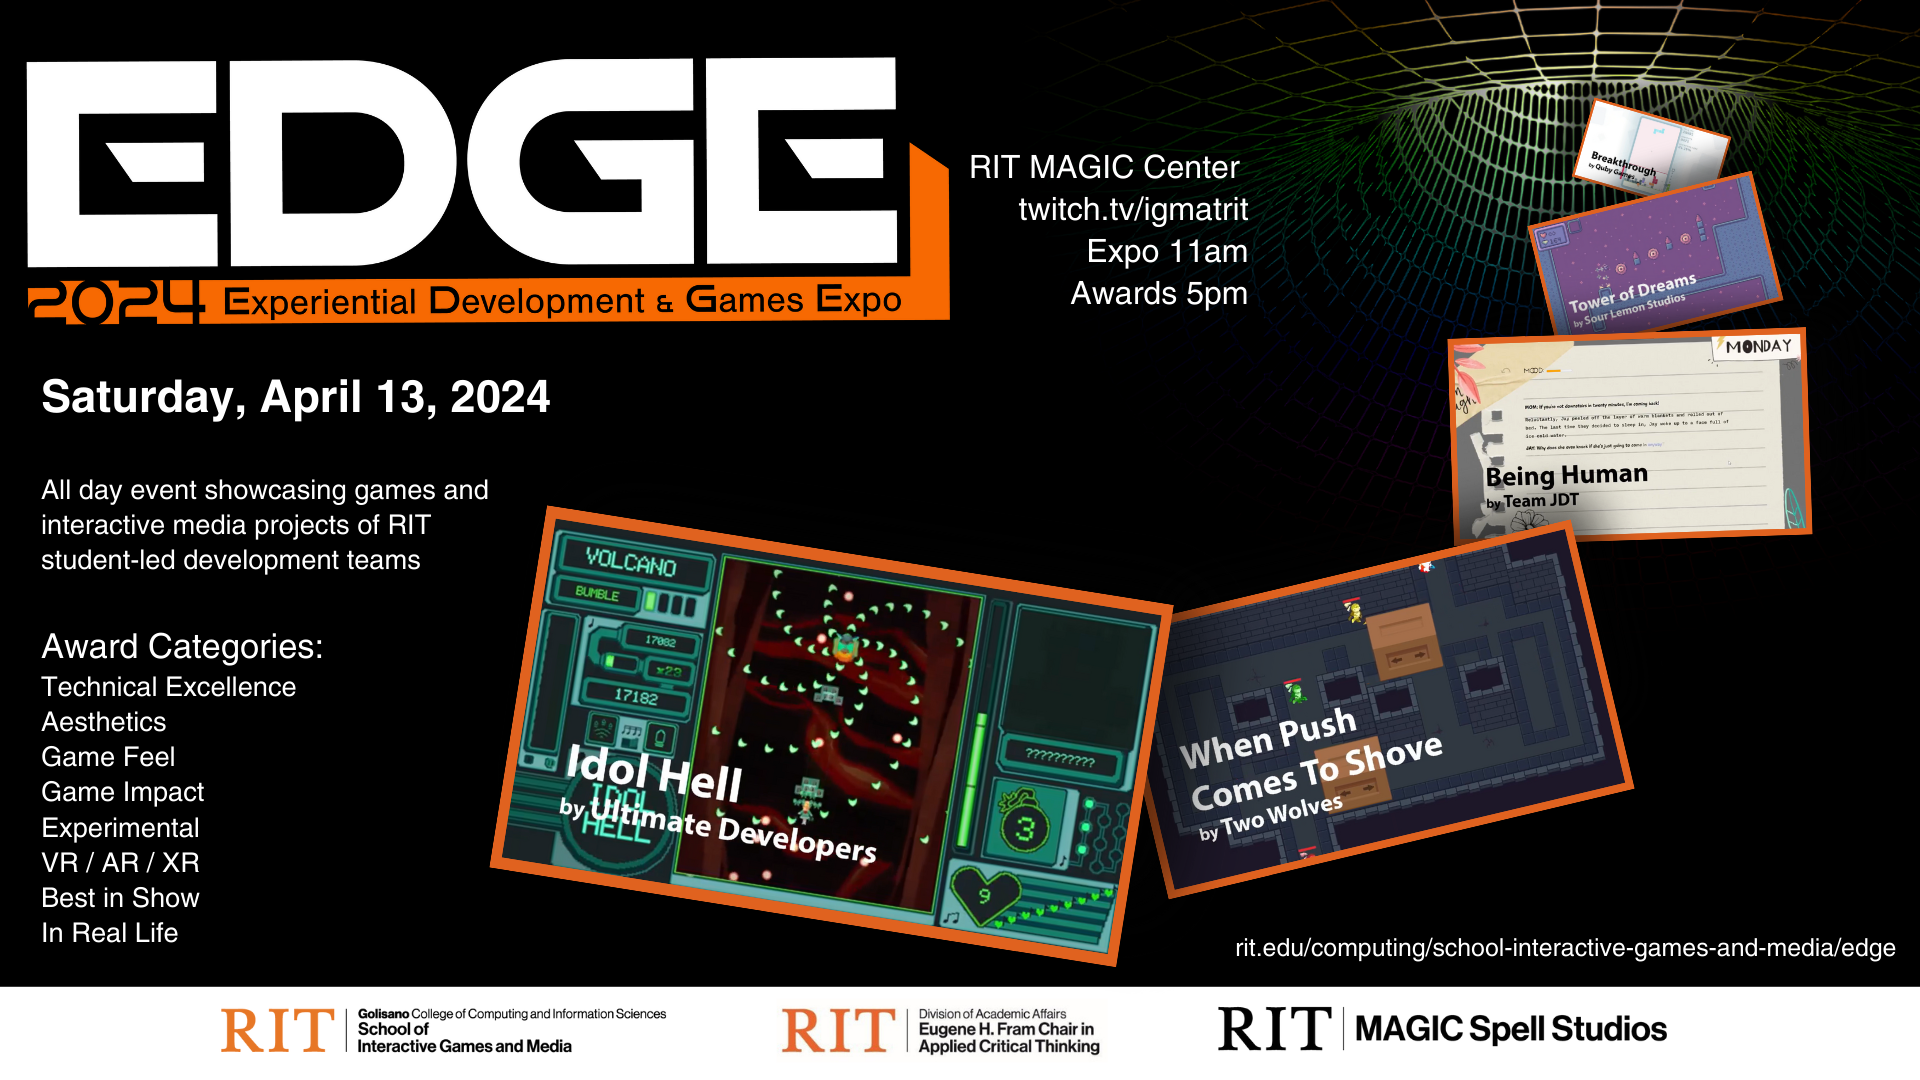 EDGE 2024 | Experiential Development & Games Expo Award Categories: Technical Excellence Aesthetics Game Feel Game Impact Experimental VR / AR / XR Best in Show In Real Life All day event showcasing games and interactive media projects of RIT student-led development teams Saturday, April 13, 2024 RIT MAGIC Center  twitch.tv/igmatrit Expo 11am Awards 5pm rit.edu/computing/school-interactive-games-and-media/edge